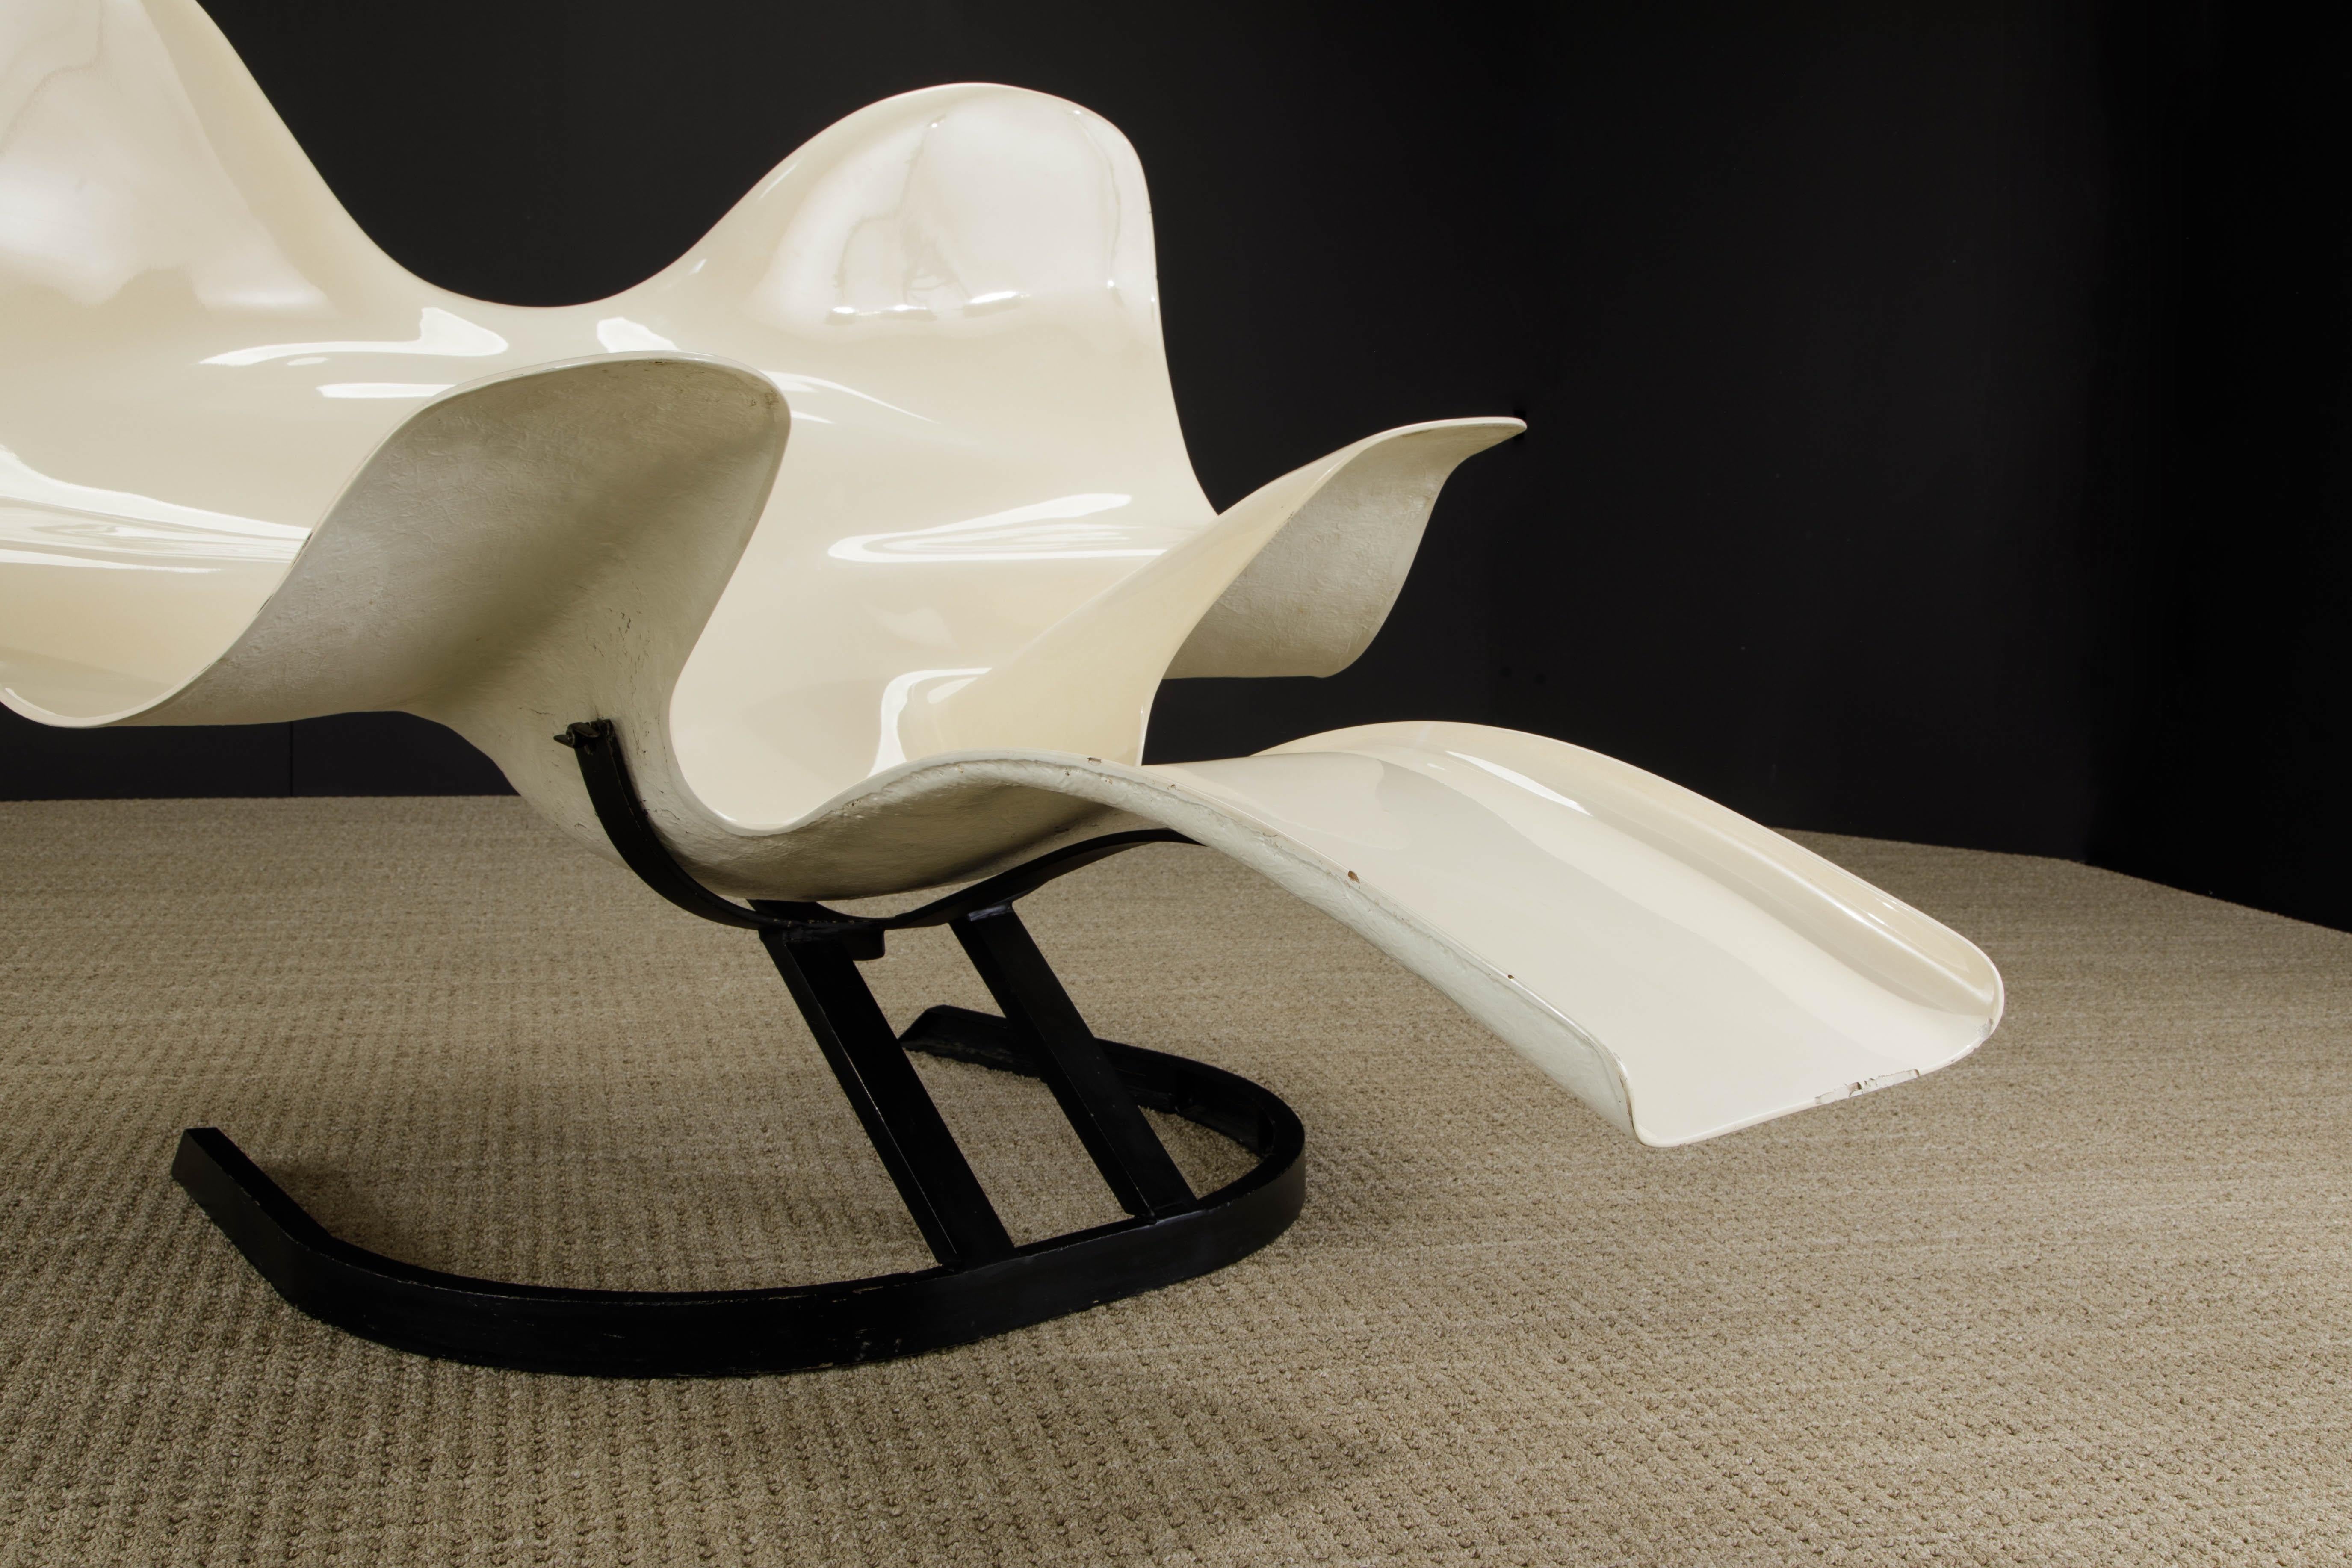 Limited Edition 'Elephant Chair' by Bernard Rancillac, 1985, Signed & Numbered 2